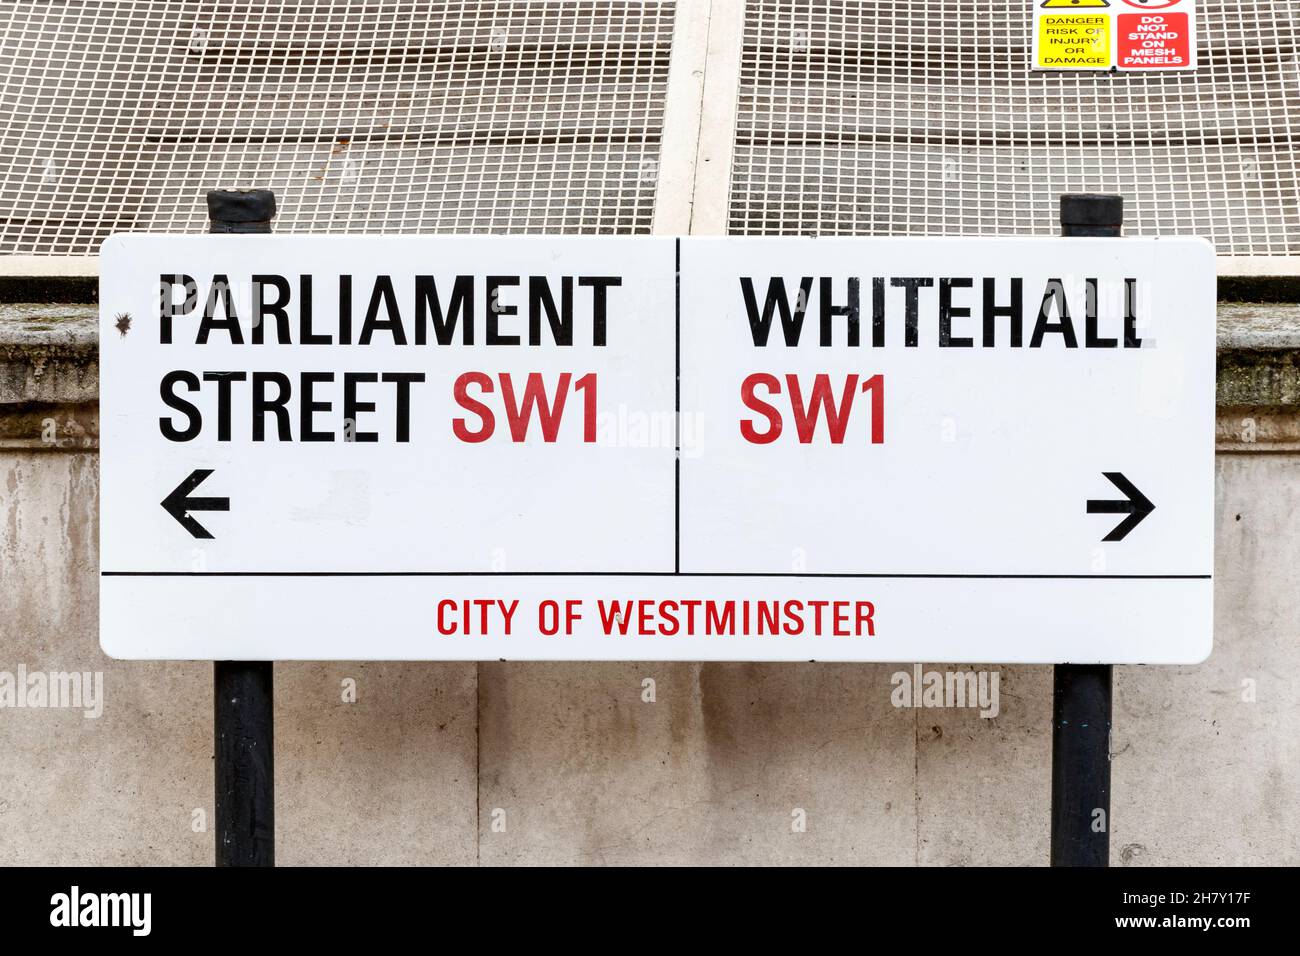 A street sign marking the delineation of Parliament Street and Whitehall, London, UK Stock Photo